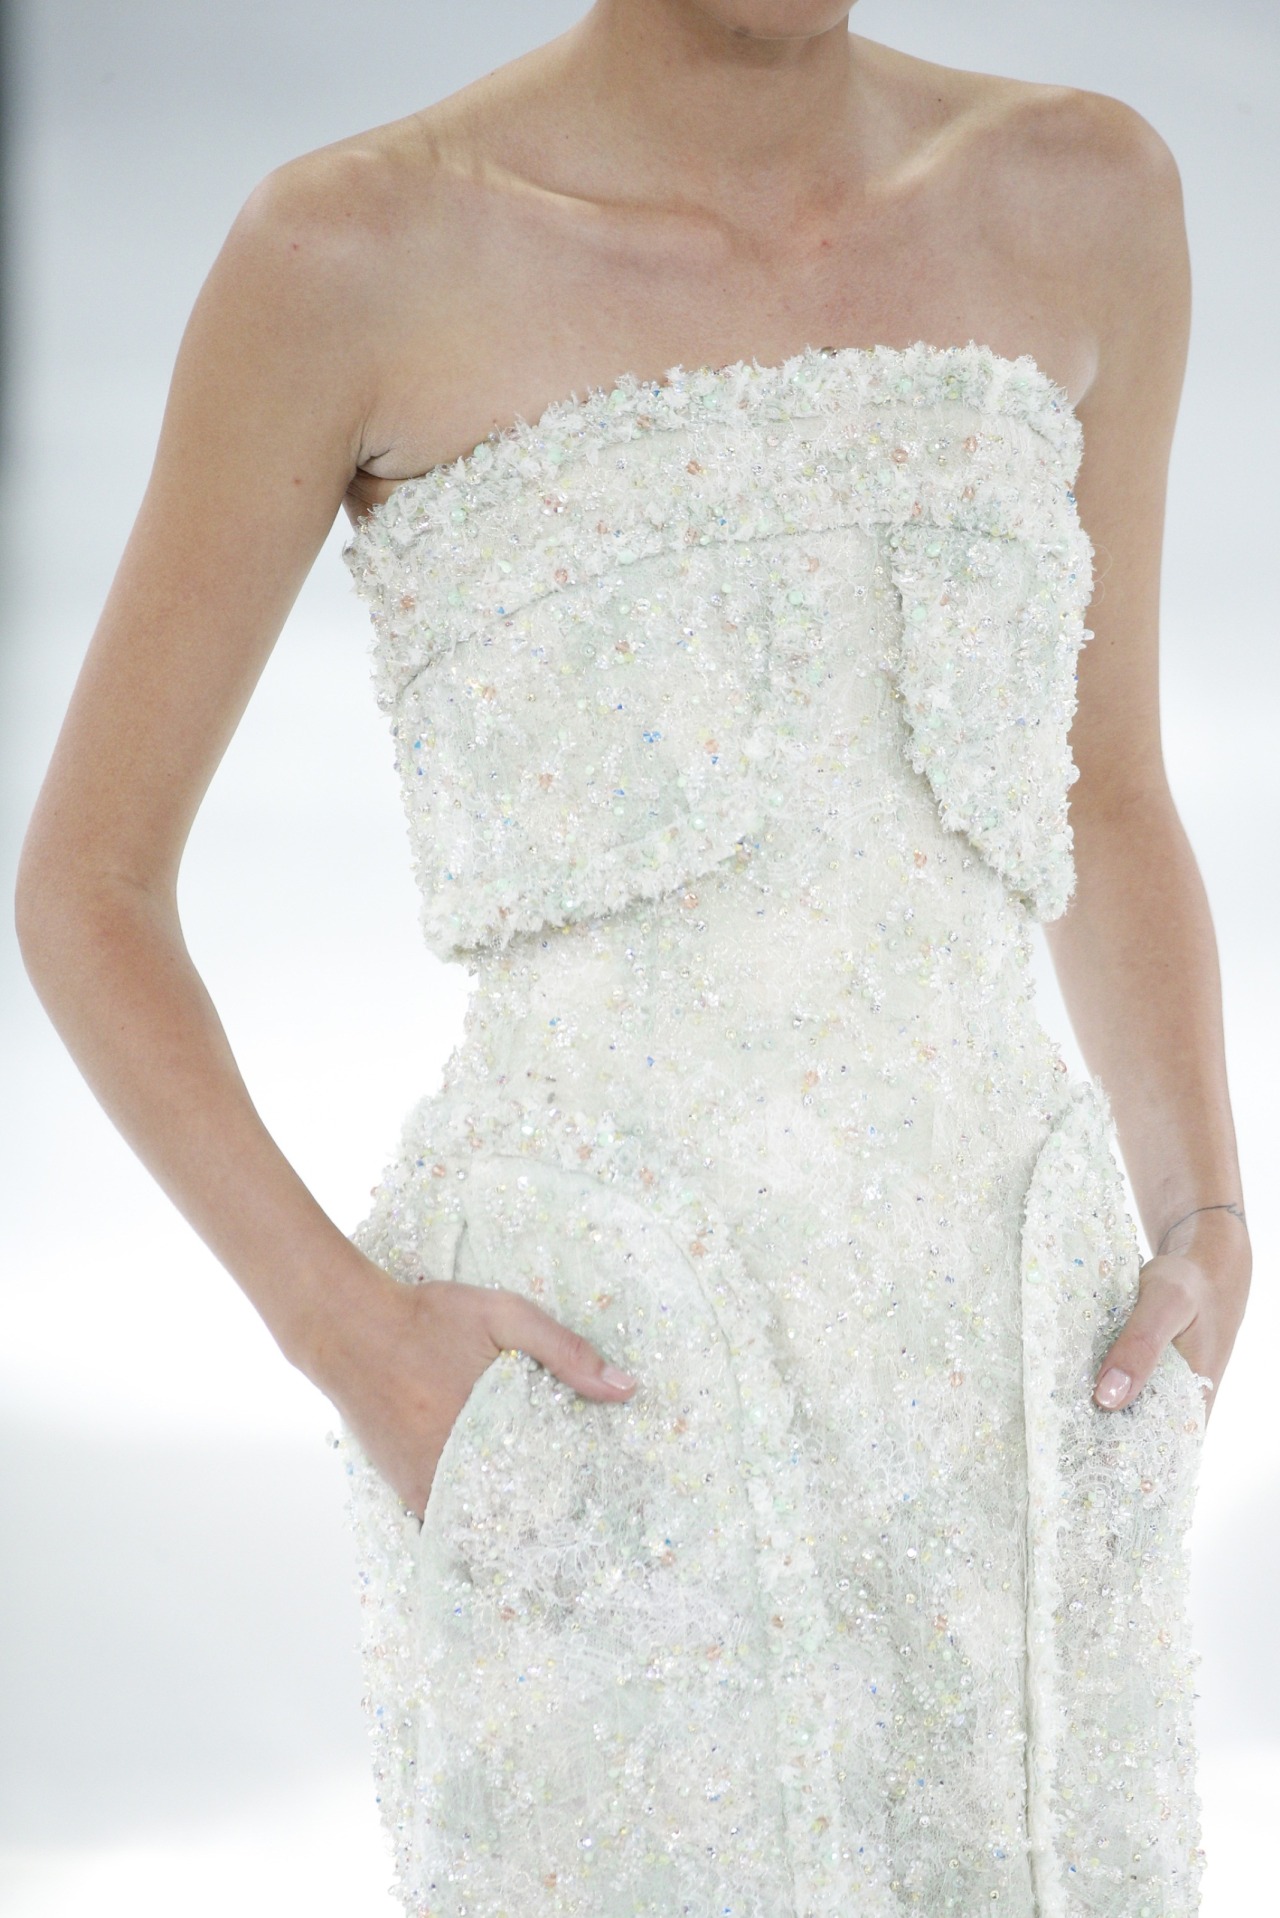 Haute Tramp - whore-for-couture: ohmywang: Details at Chanel...